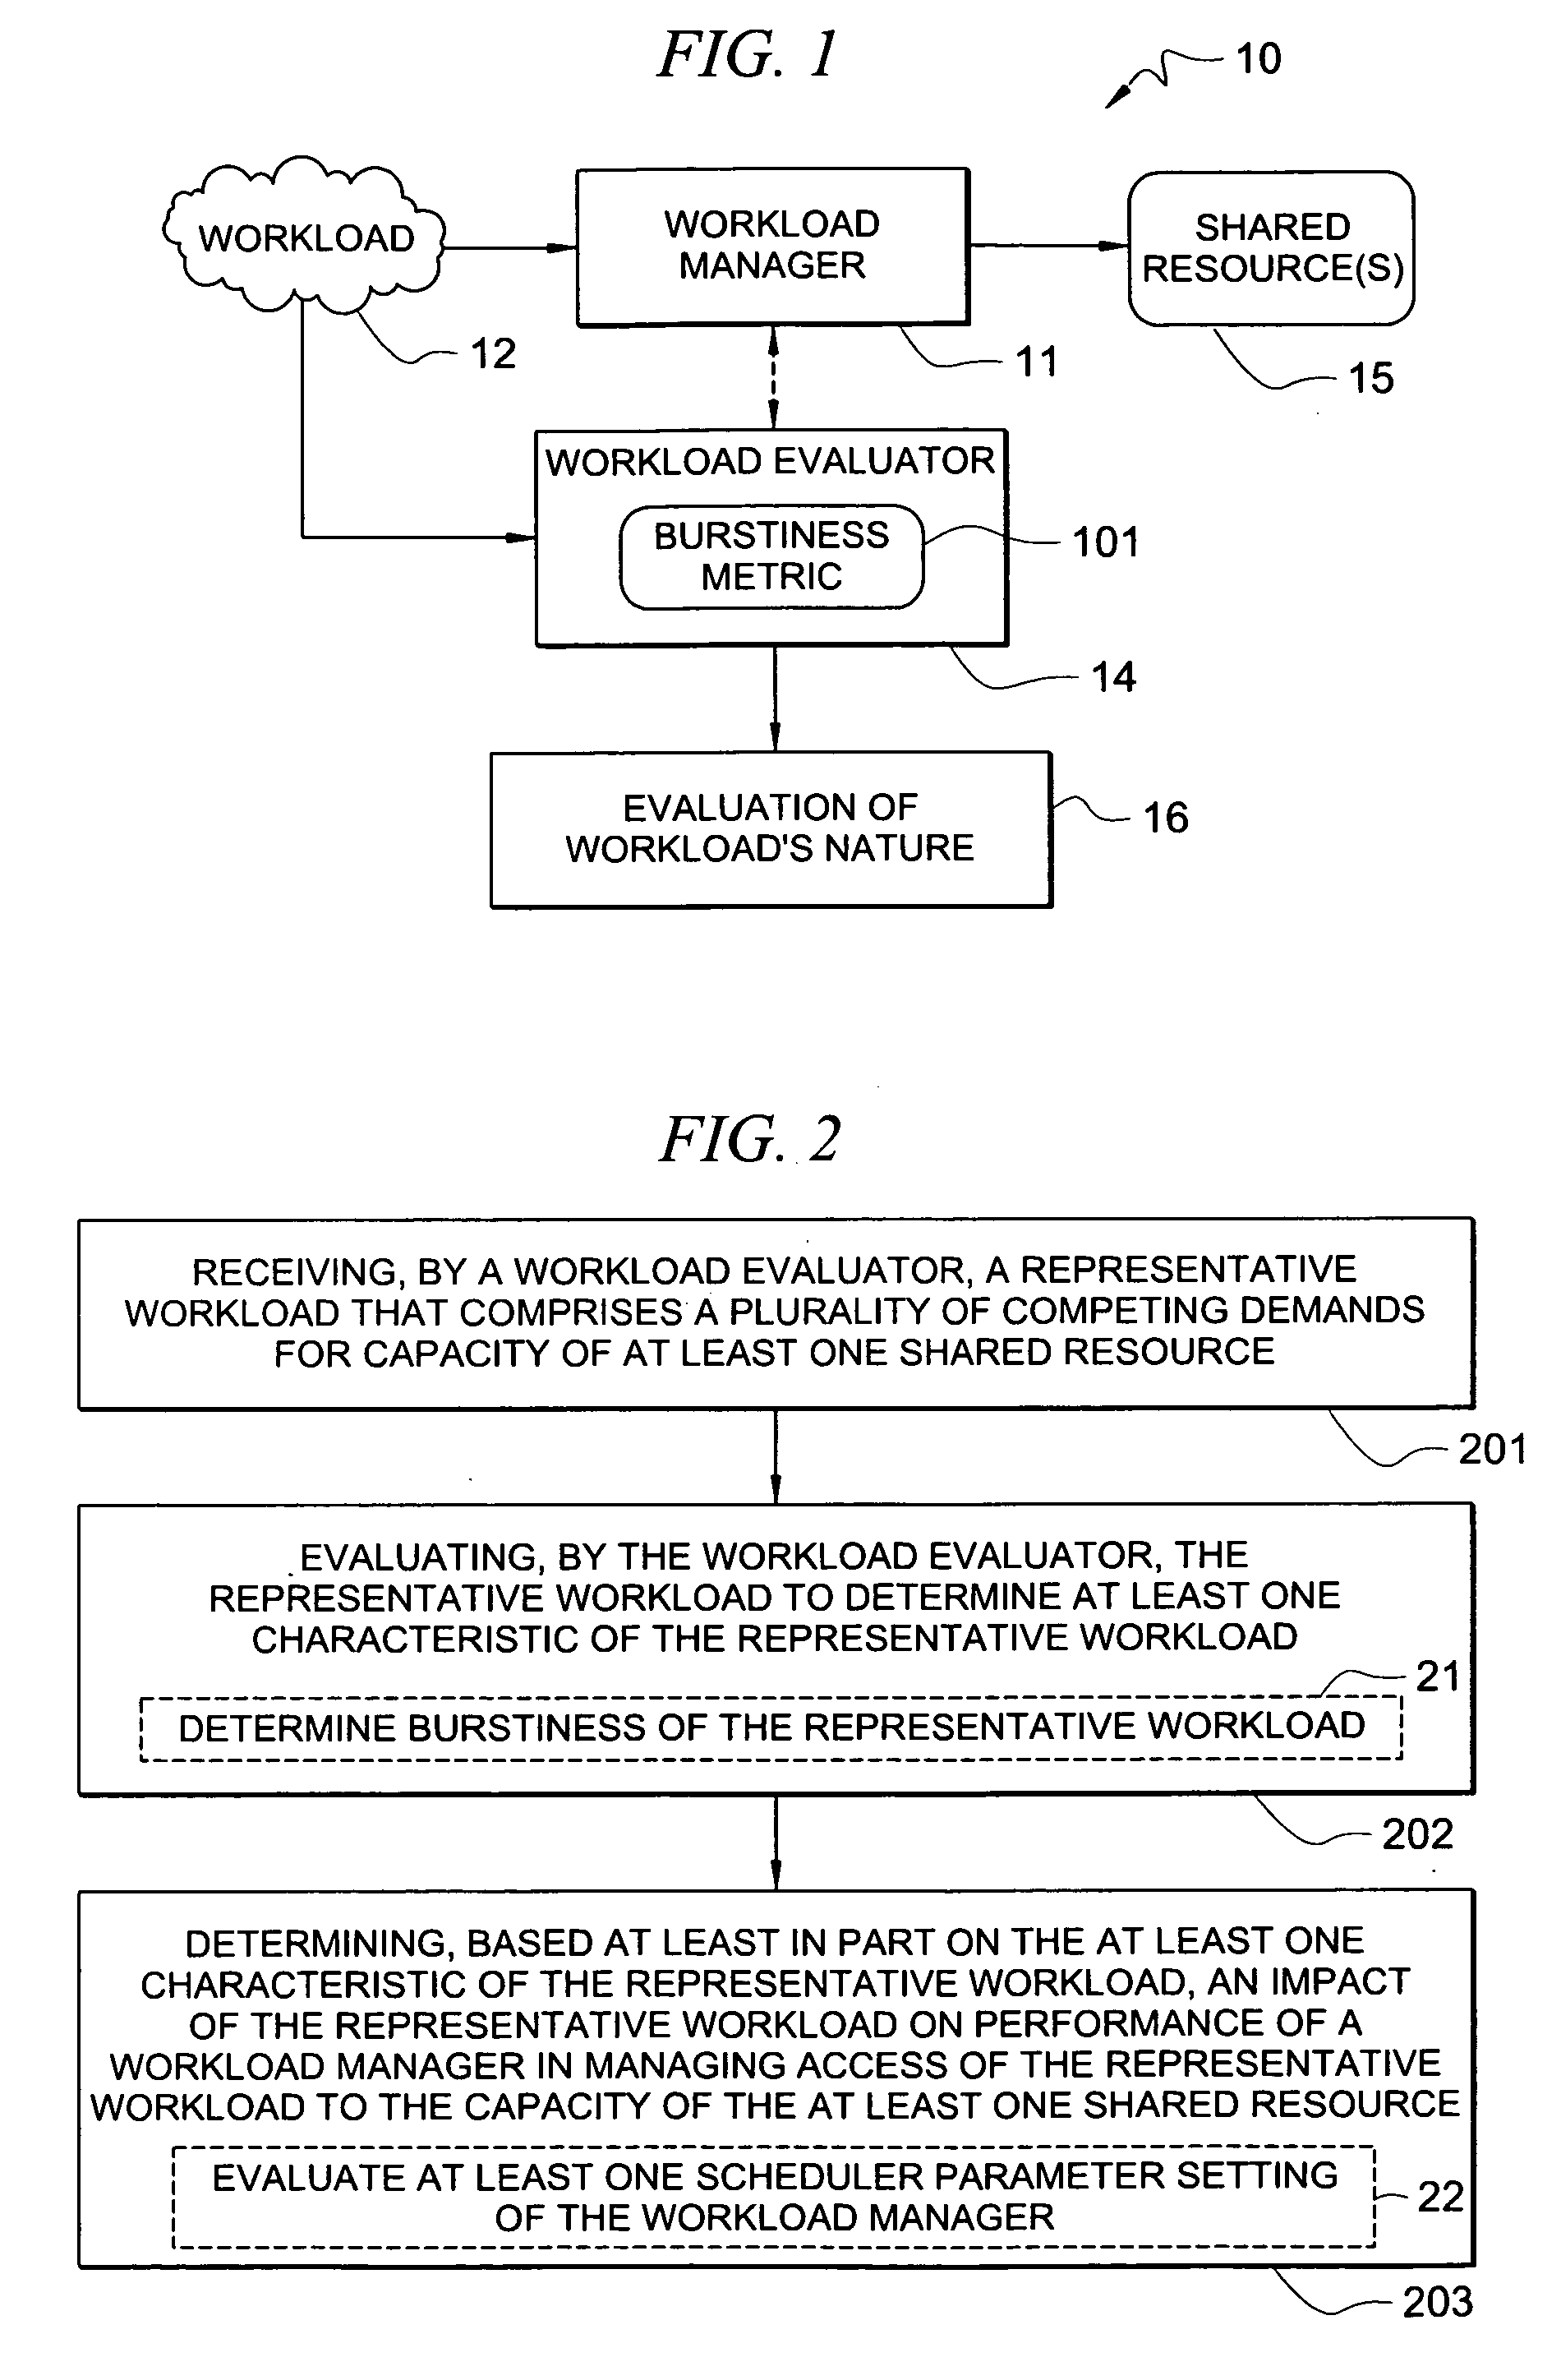 System and method for evaluating a workload and its impact on performance of a workload manager